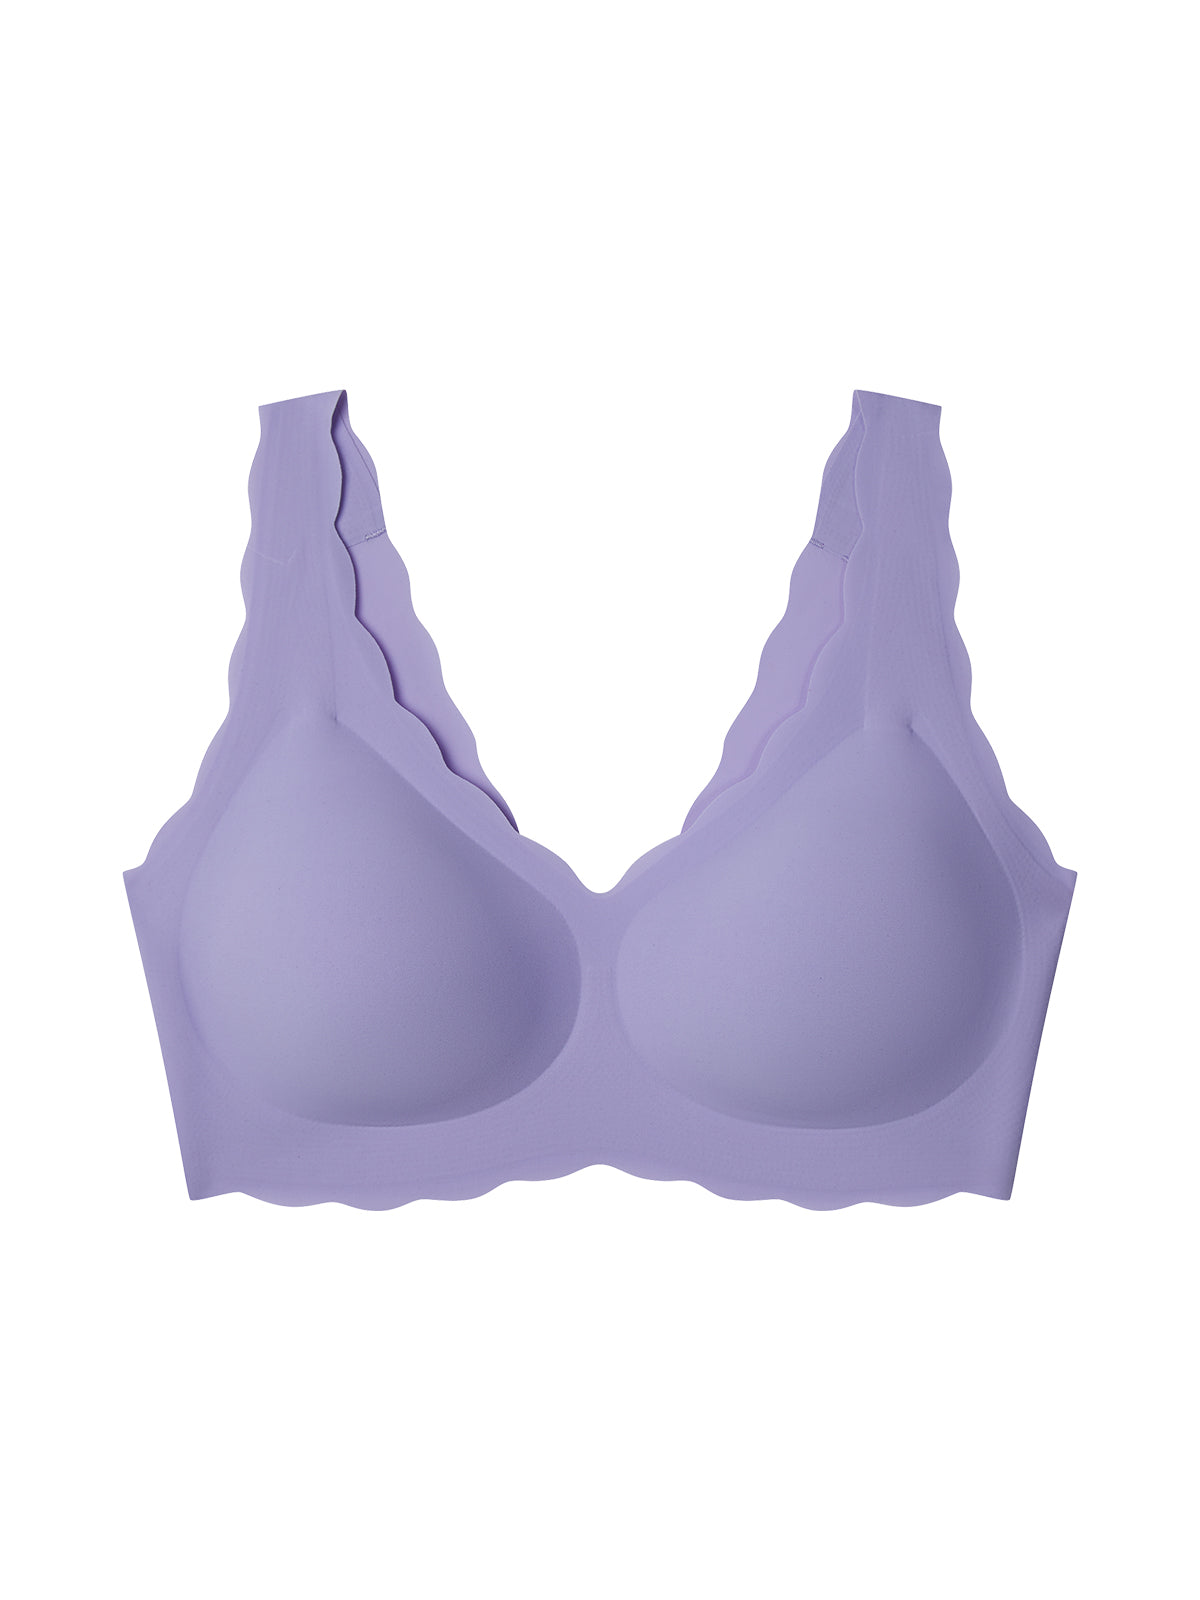 Women's Purple Bras / Lingerie Tops gifts - up to −80%